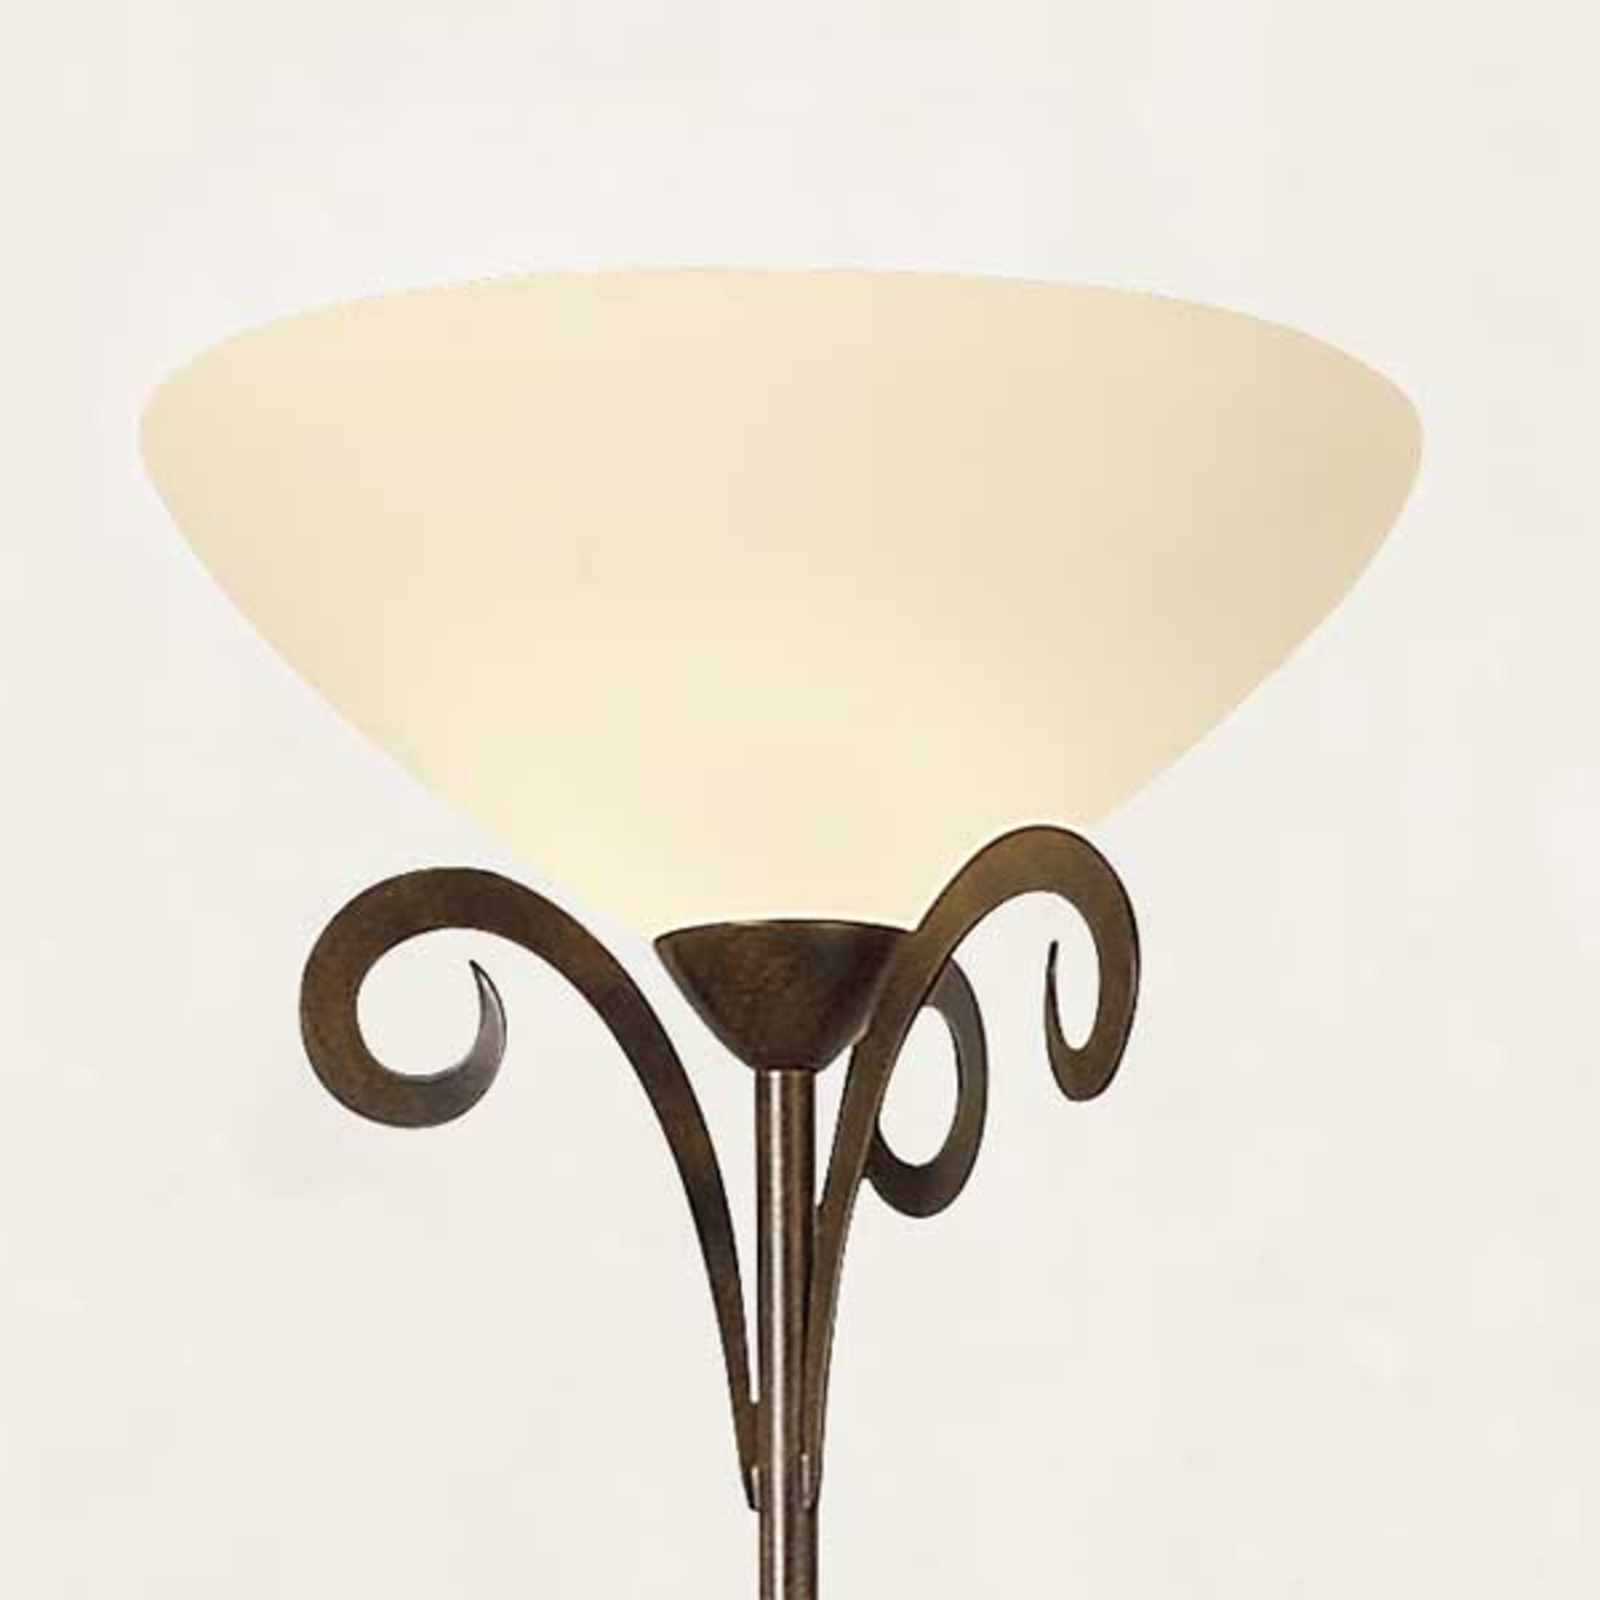 Floor lamp Luca in country house style